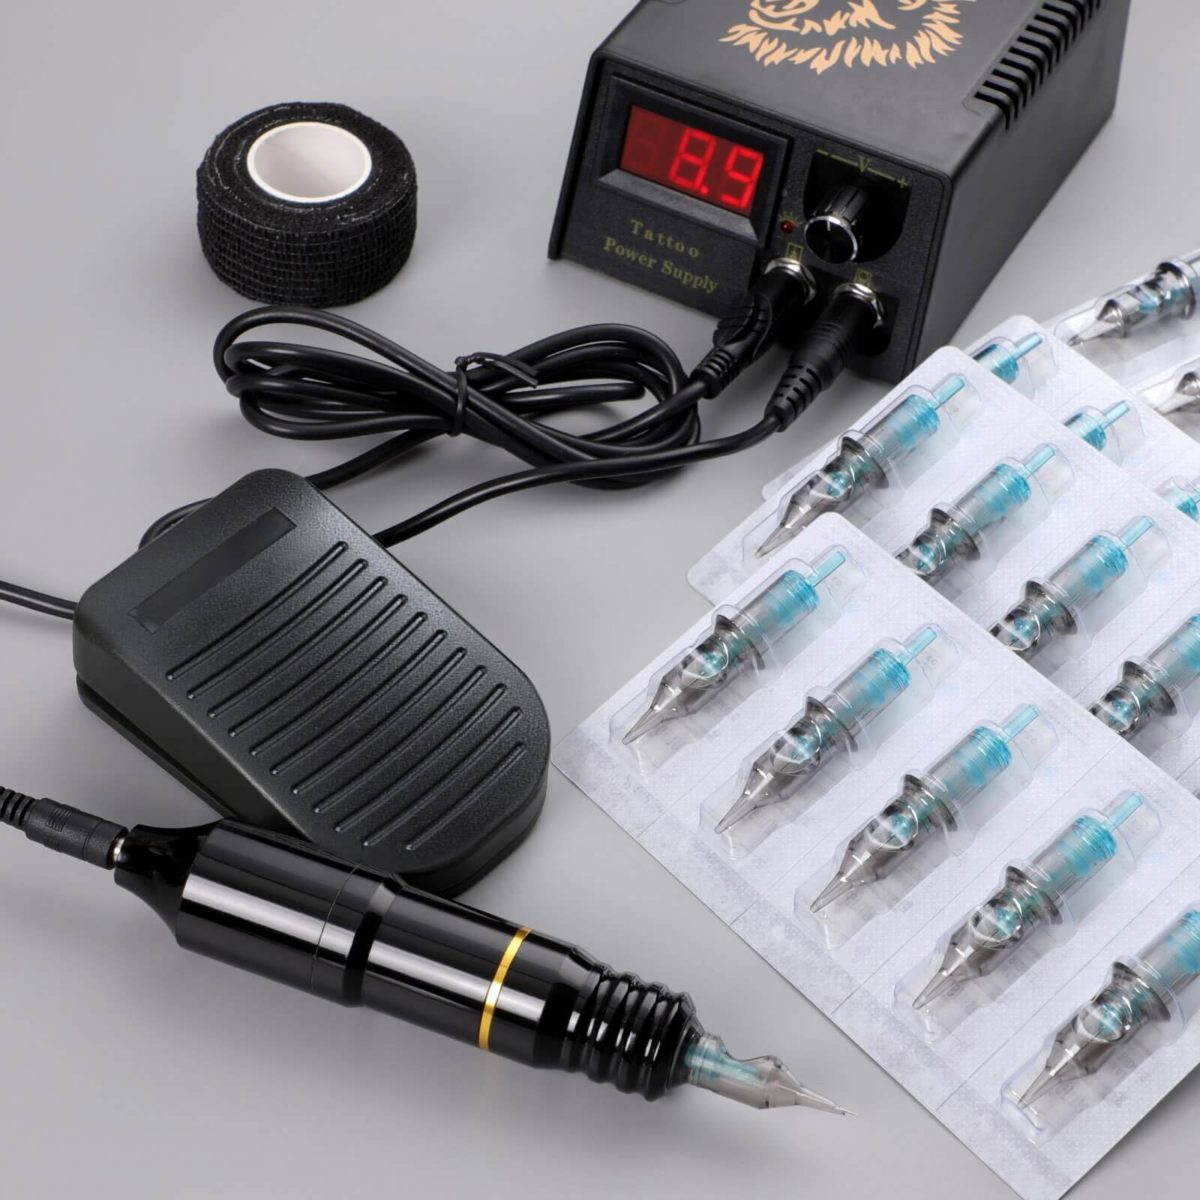 Stigma Rotary Tattoo Pen Kit with 7 color ink